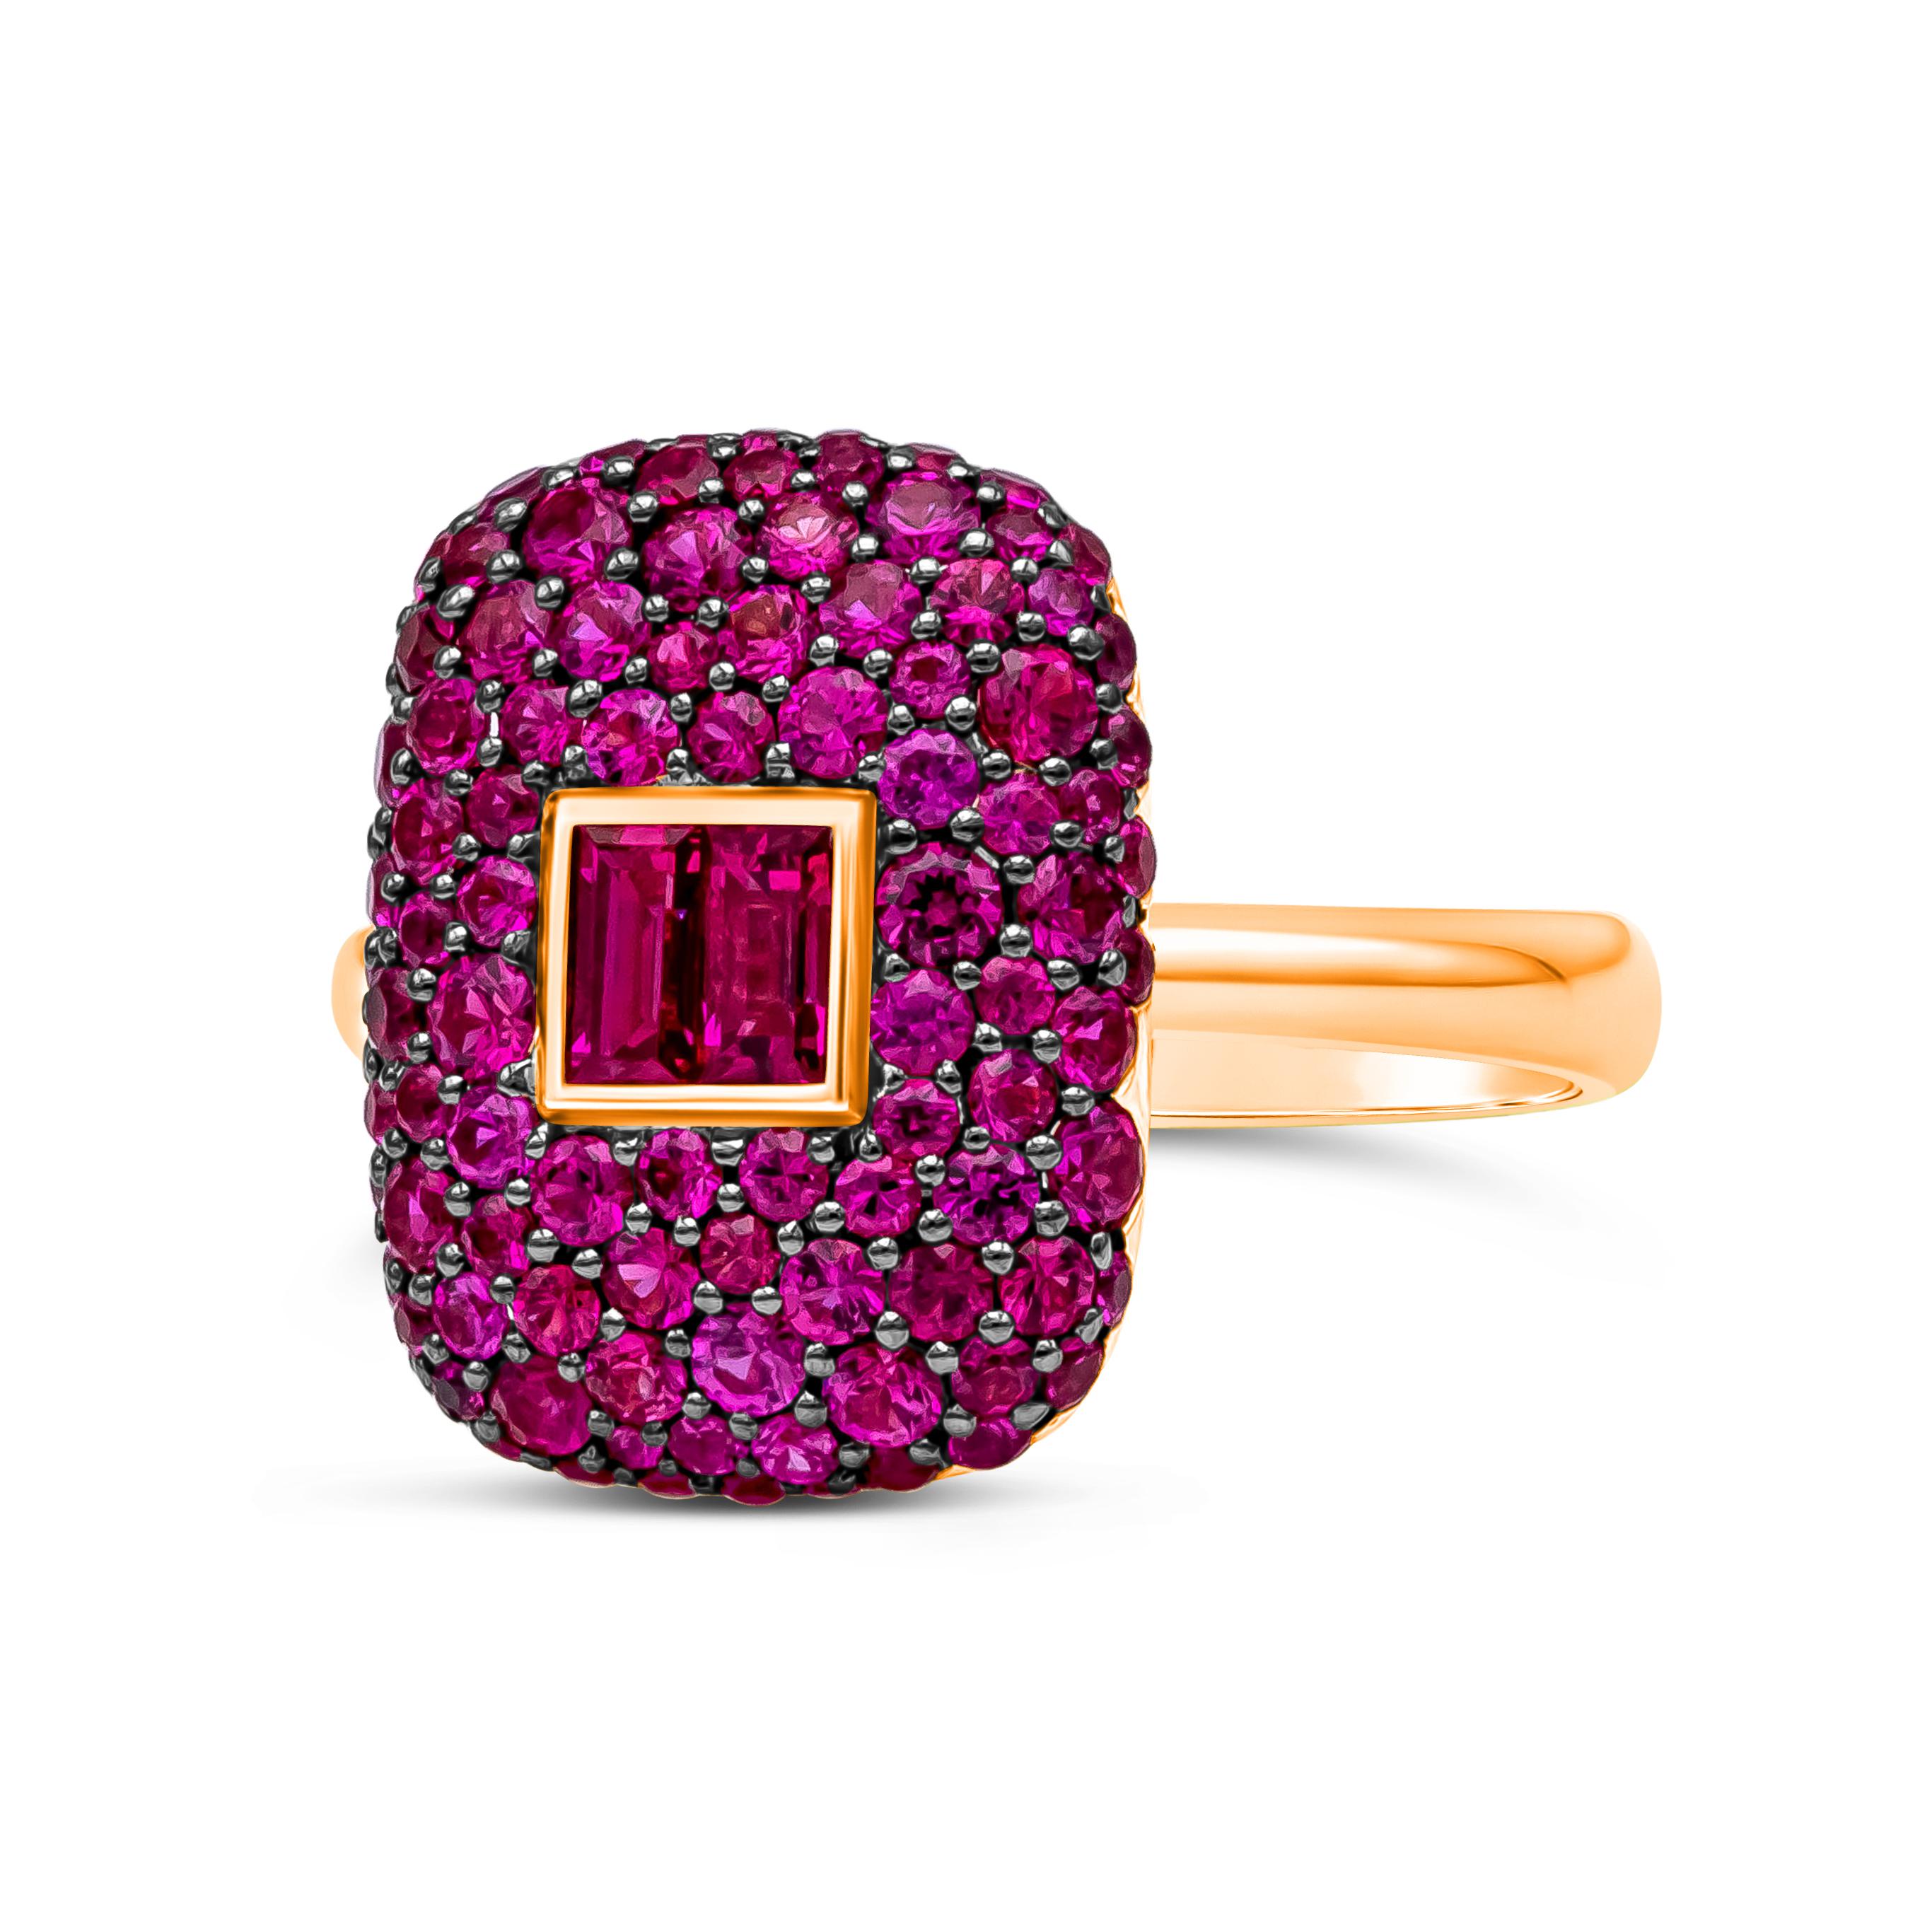 A unique and stylish fashion ring that features a 1.85 carat total of a vibrant mixed baguette and round cut red rubies, set in and 18k Rose Gold mounting. Size 6.5 US.

Style available in different gem set (Diamond, Tsavorite, Sapphire). Prices are